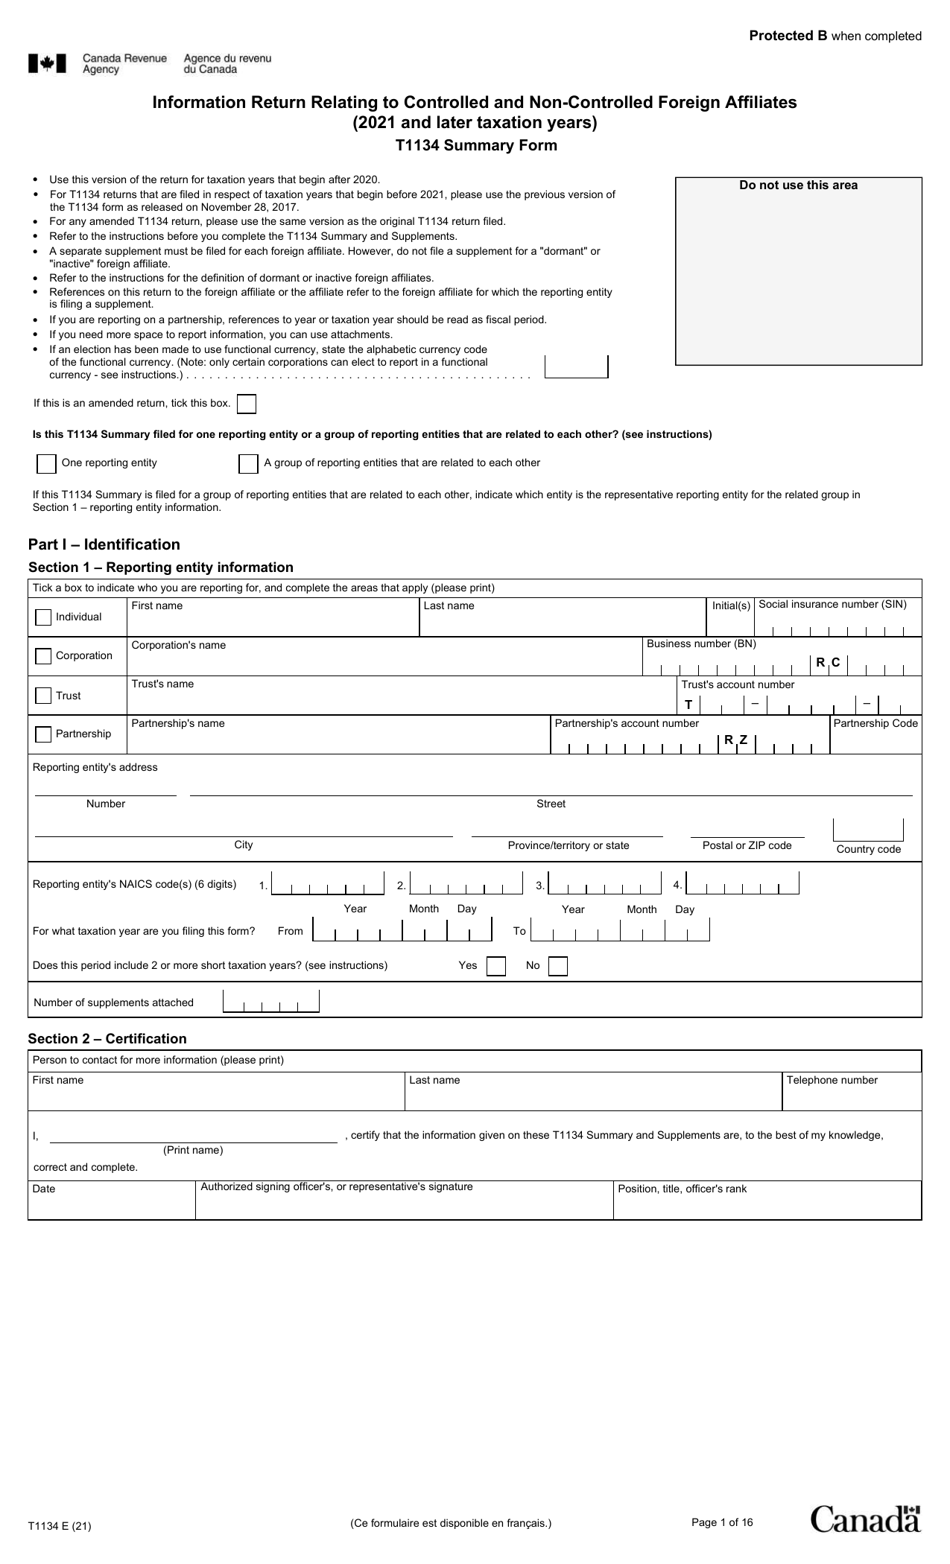 Form T1134 Information Return Relating to Controlled and Non-controlled Foreign Affiliates (2021 and Later Taxation Years) - Canada, Page 1